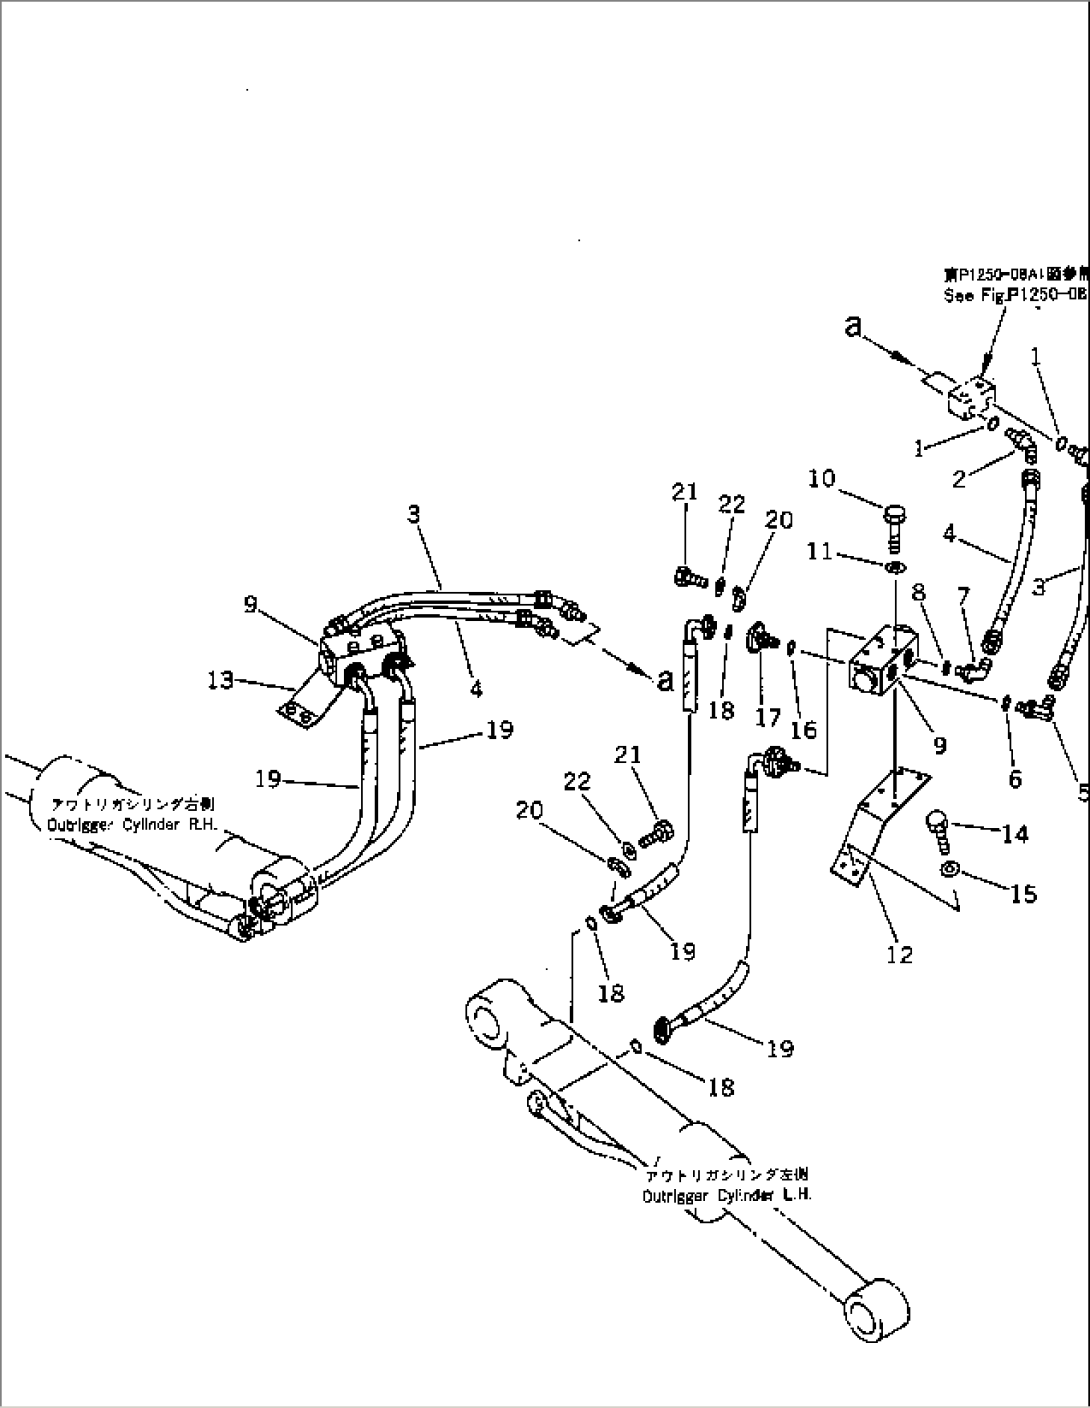 FRONT OUTRIGGER PIPING (WITH INDEPENDENT FRONT/REAR OUTRIGGER)